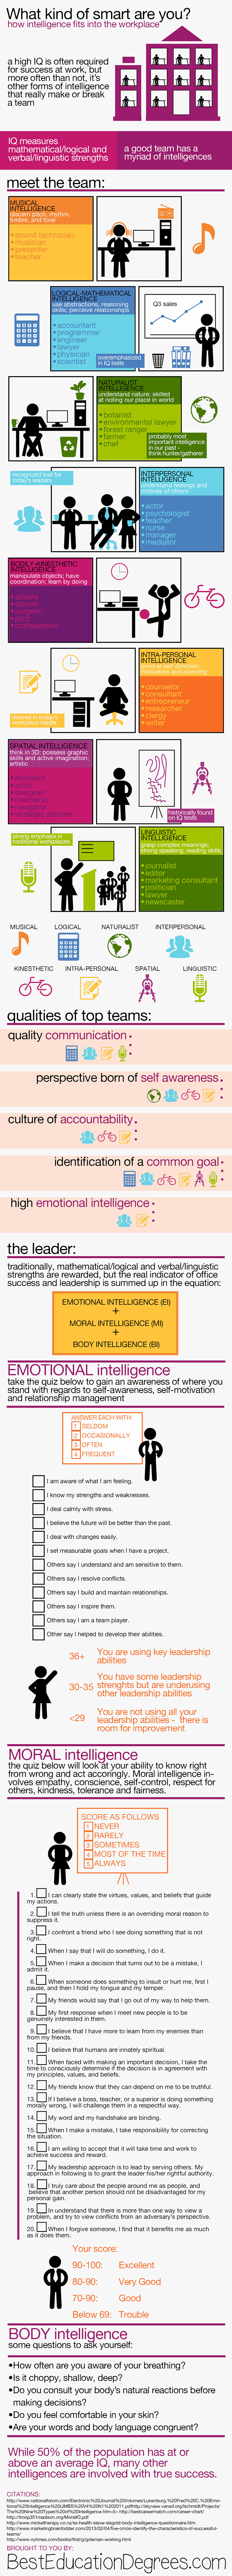 what kind of smart are you infographic